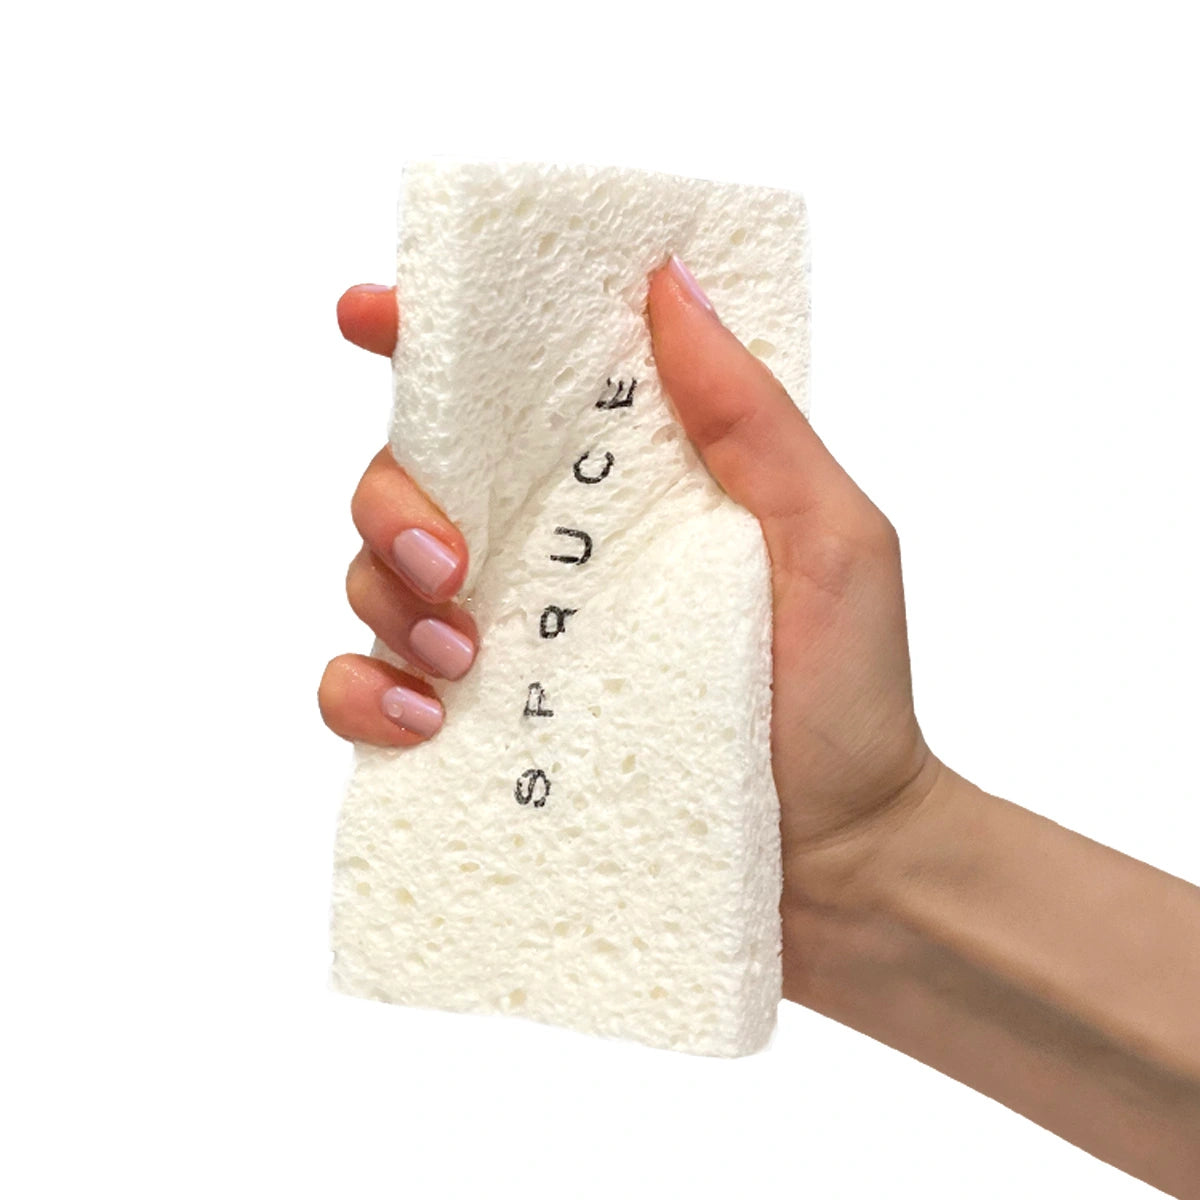 eco friendly cleaning products - plastic-free sponges